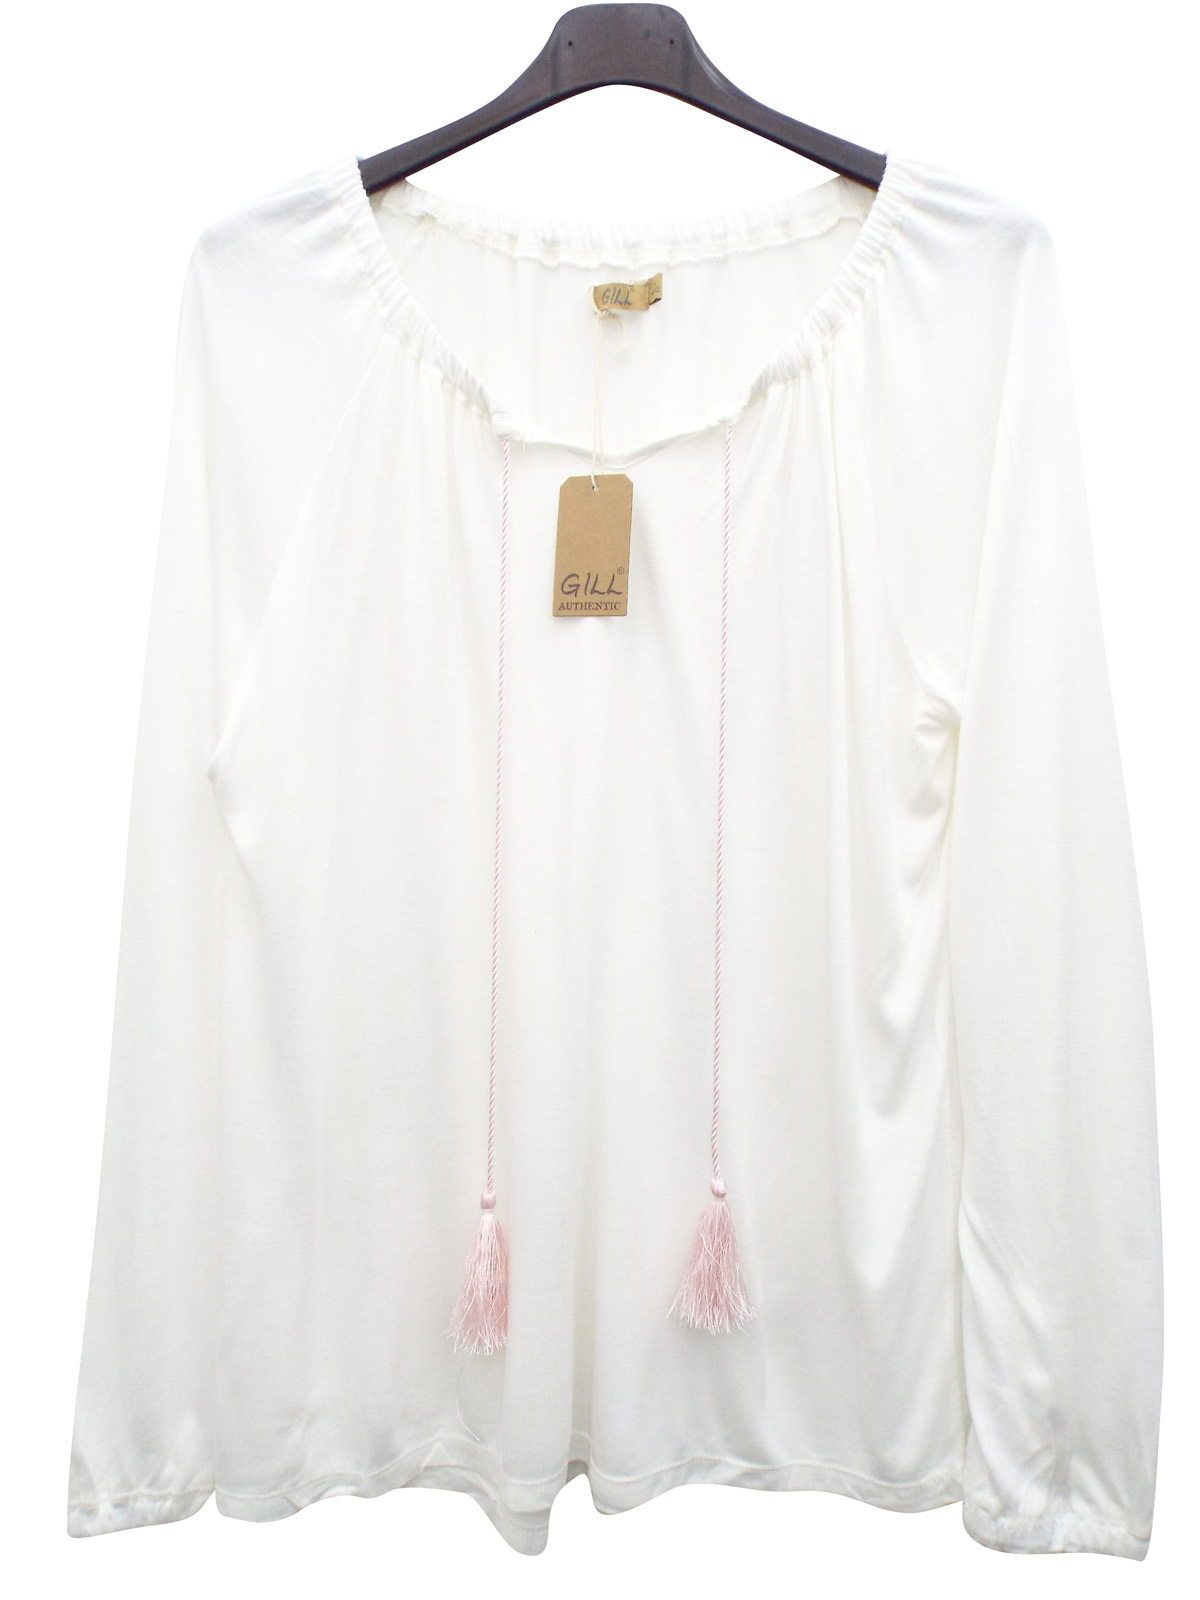 Gill - - Gill WHITE Long Sleeve Tassel Ties Jersey Top - Size 10/12 to ...